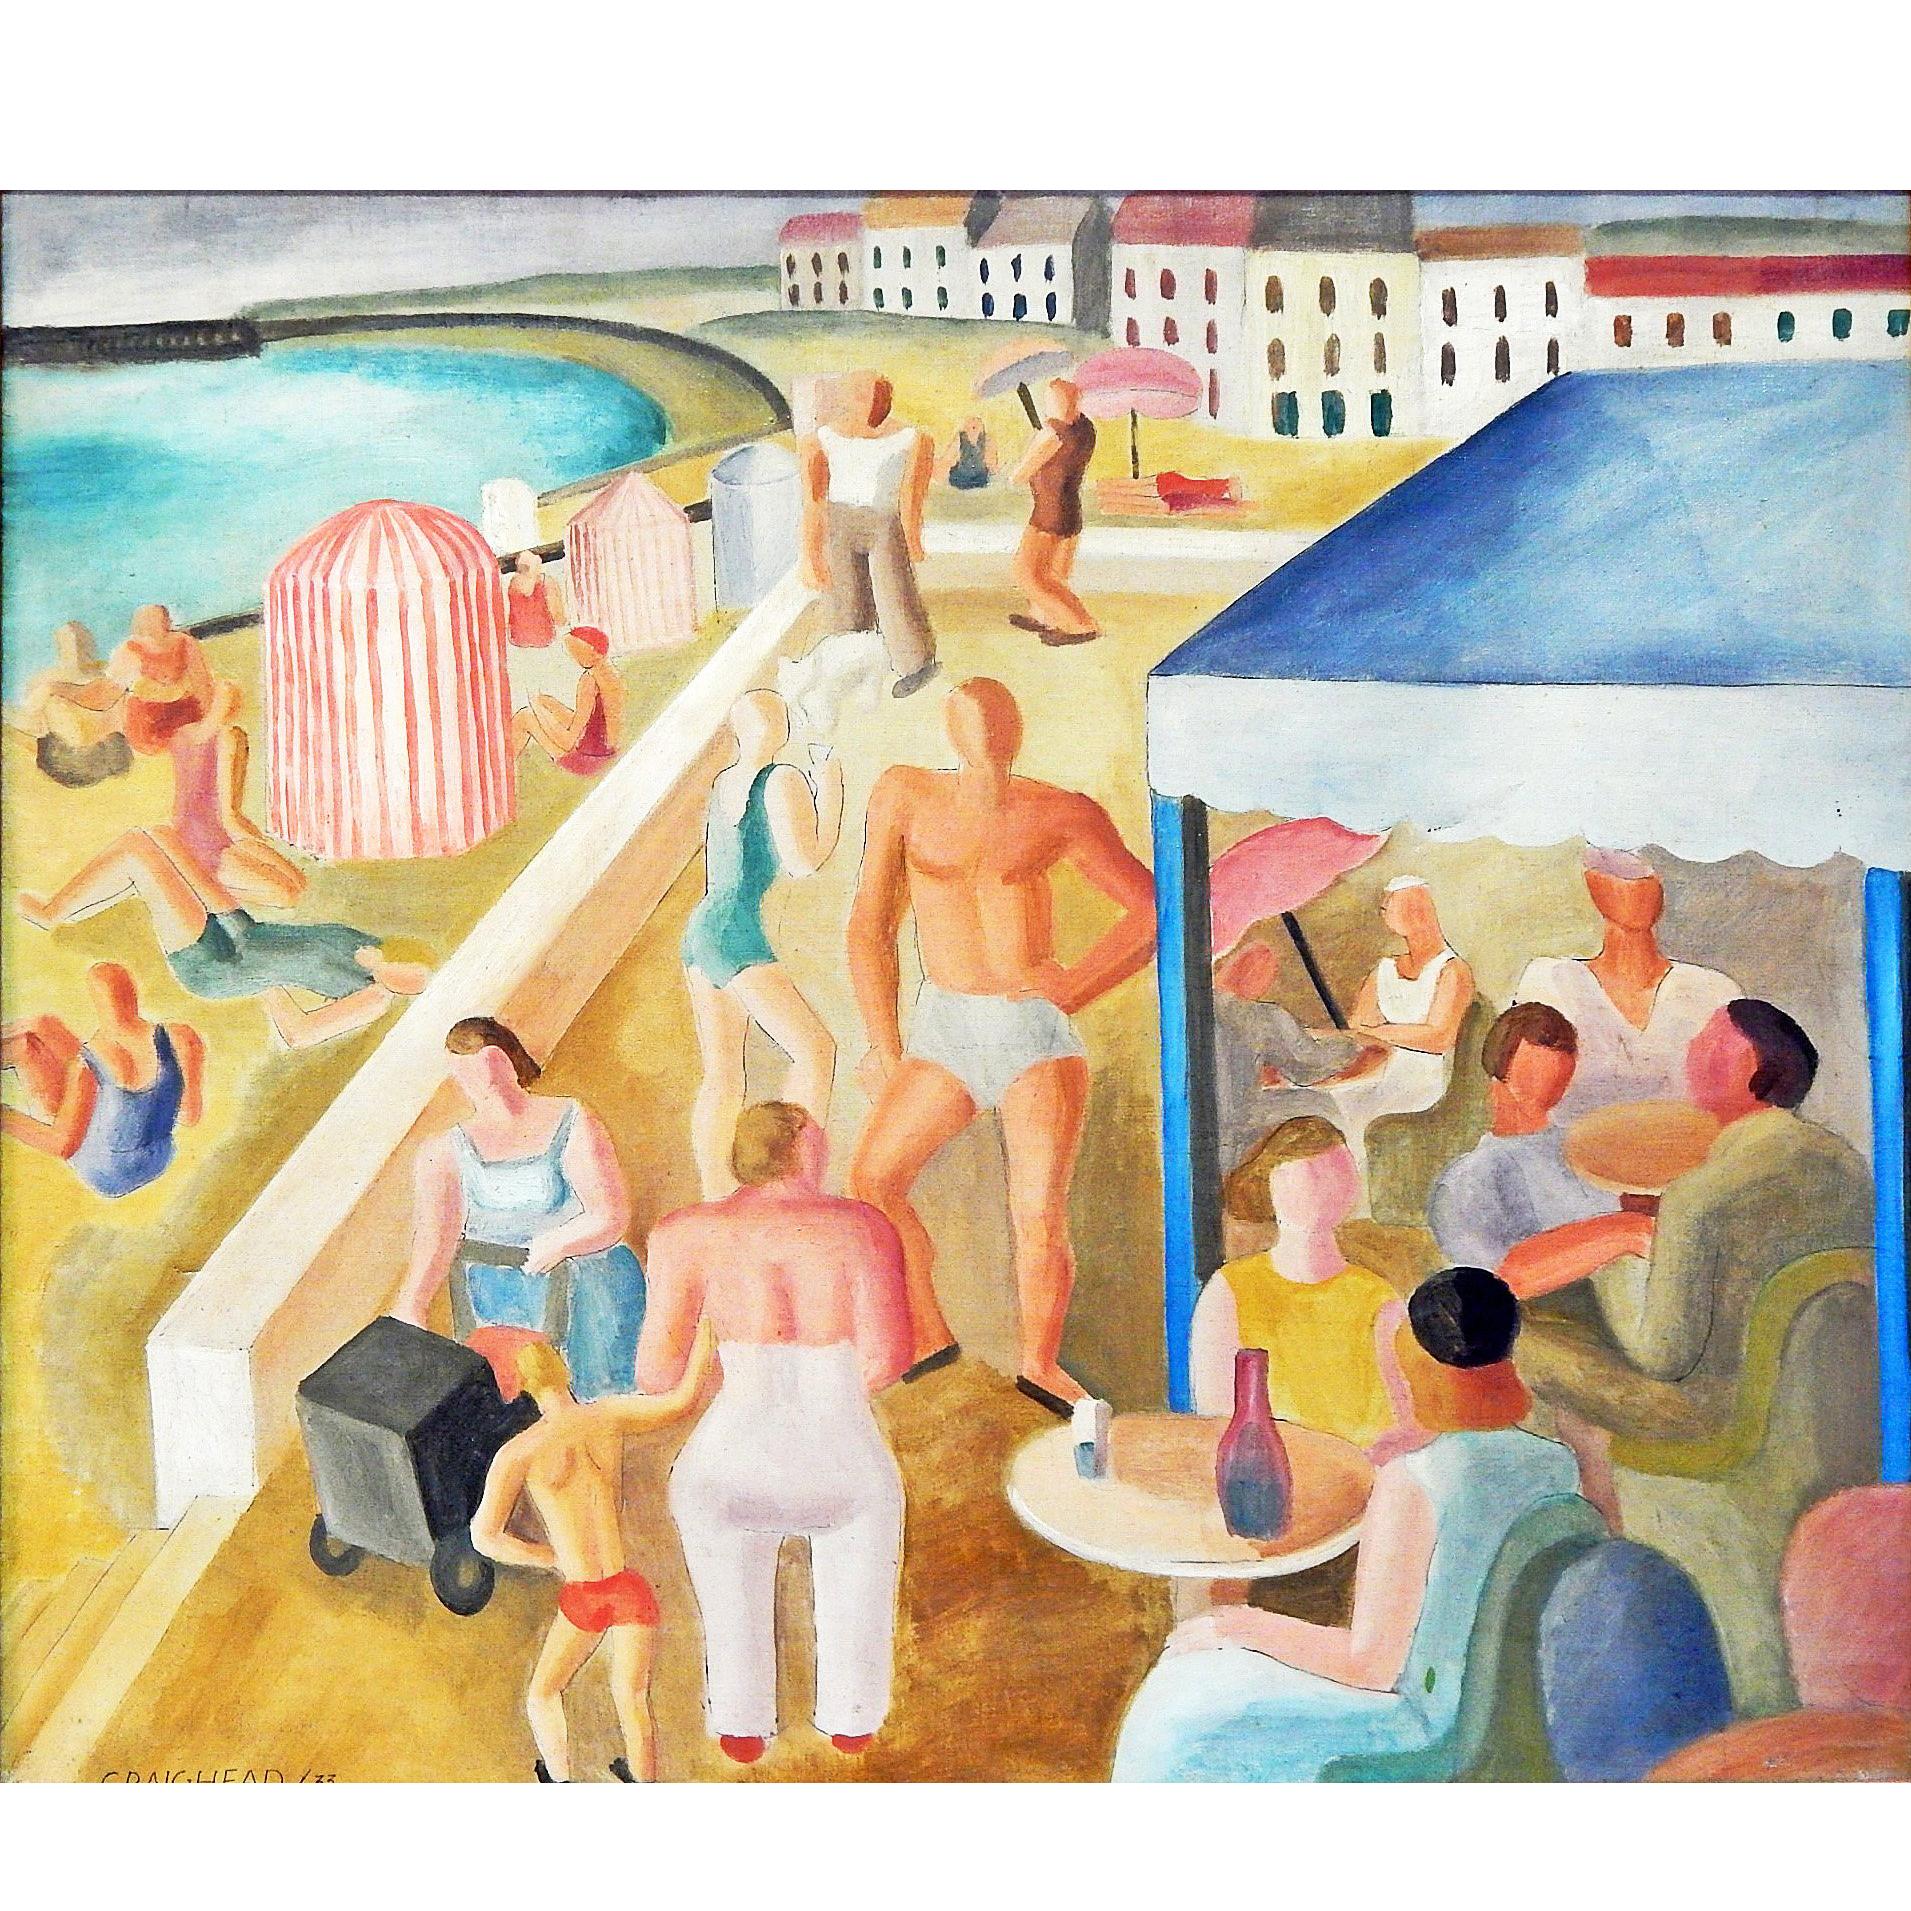 "Cafe on the Beach, " Vivid, Sun-Filled Scene Painting, French Seashore, 1933